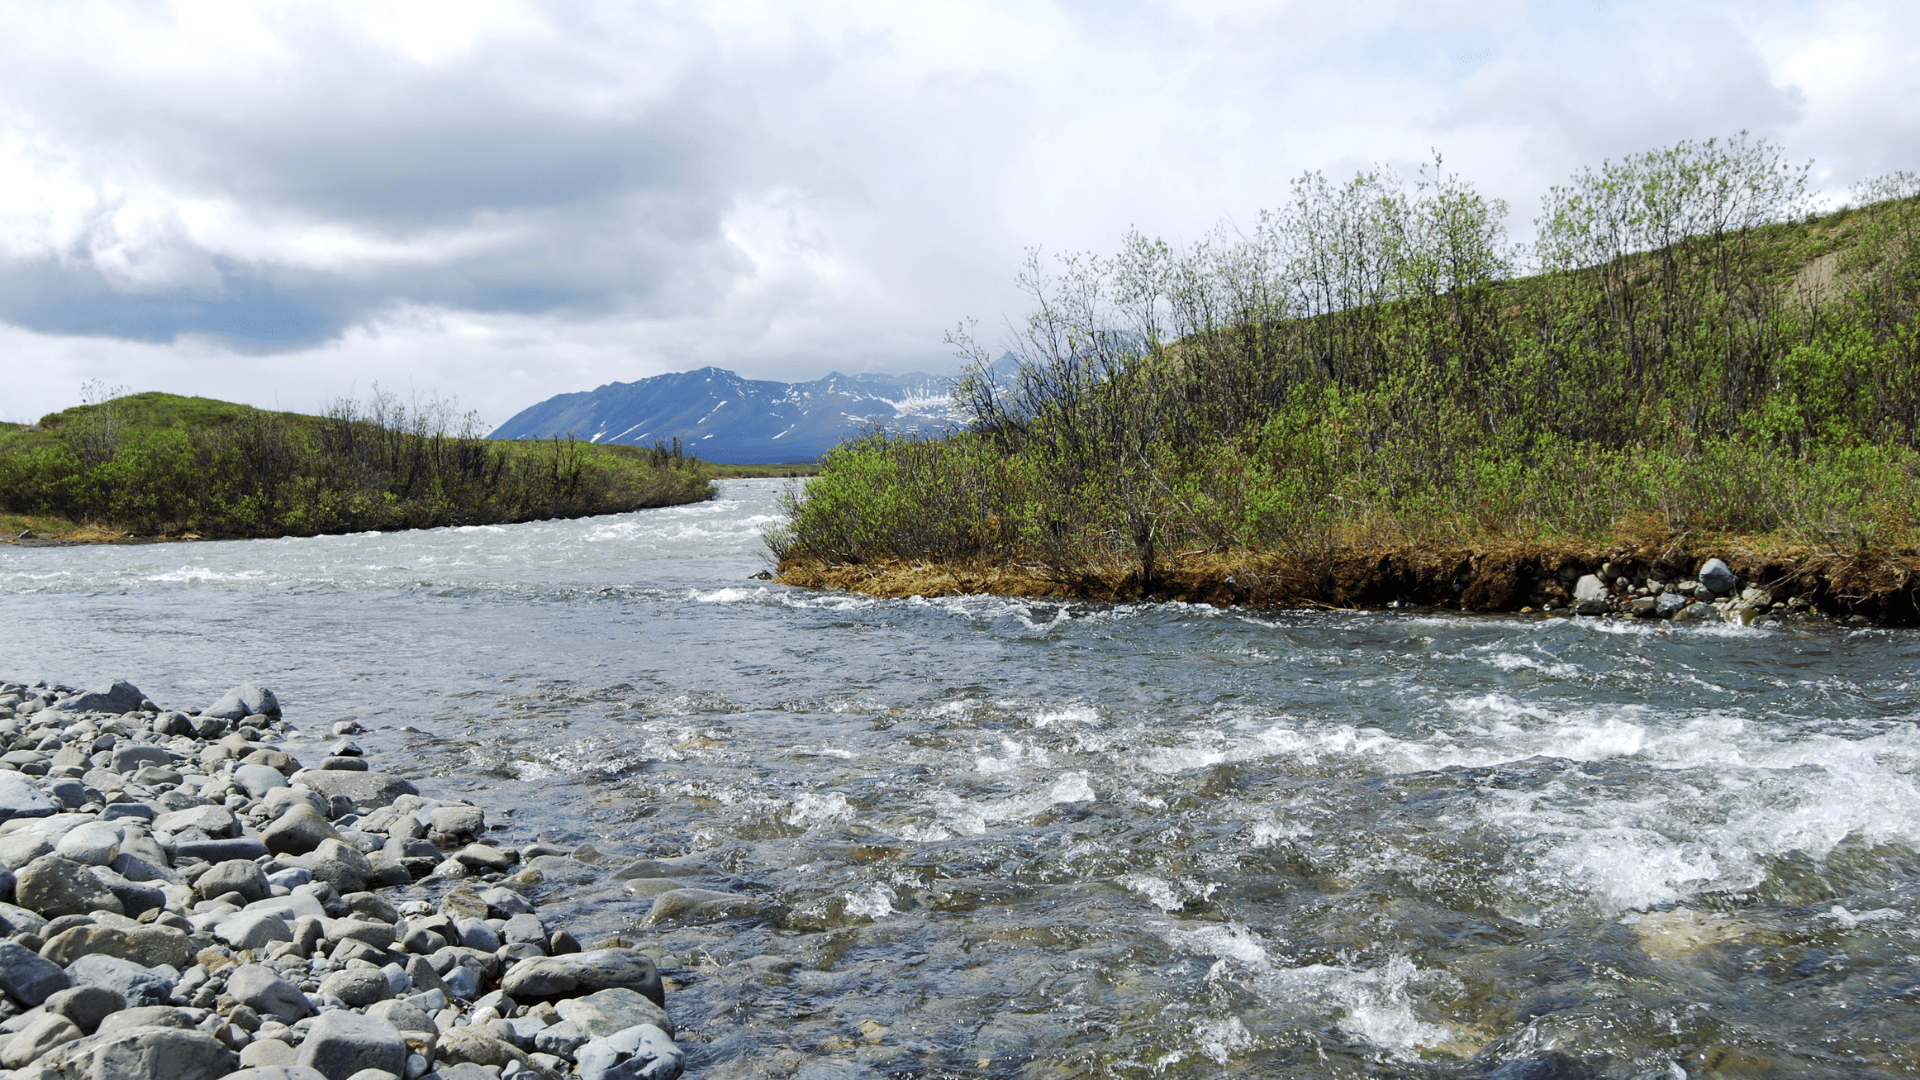 a rushing river with rocky shore in foreground, trees and distant mountain in background